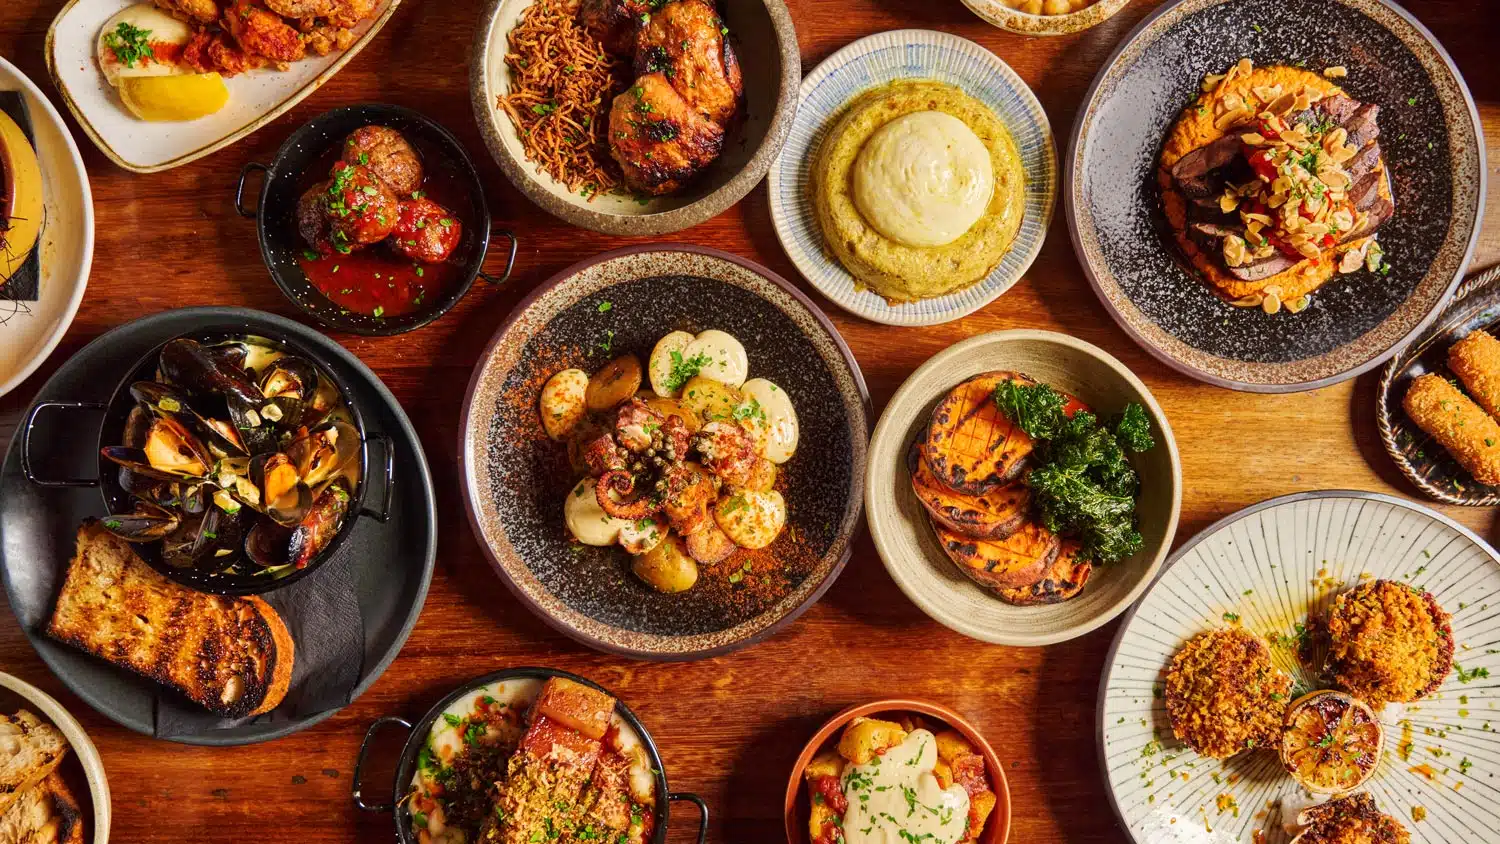 Welcome to El Gato Negro Tapas in Leeds, Manchester & Liverpool